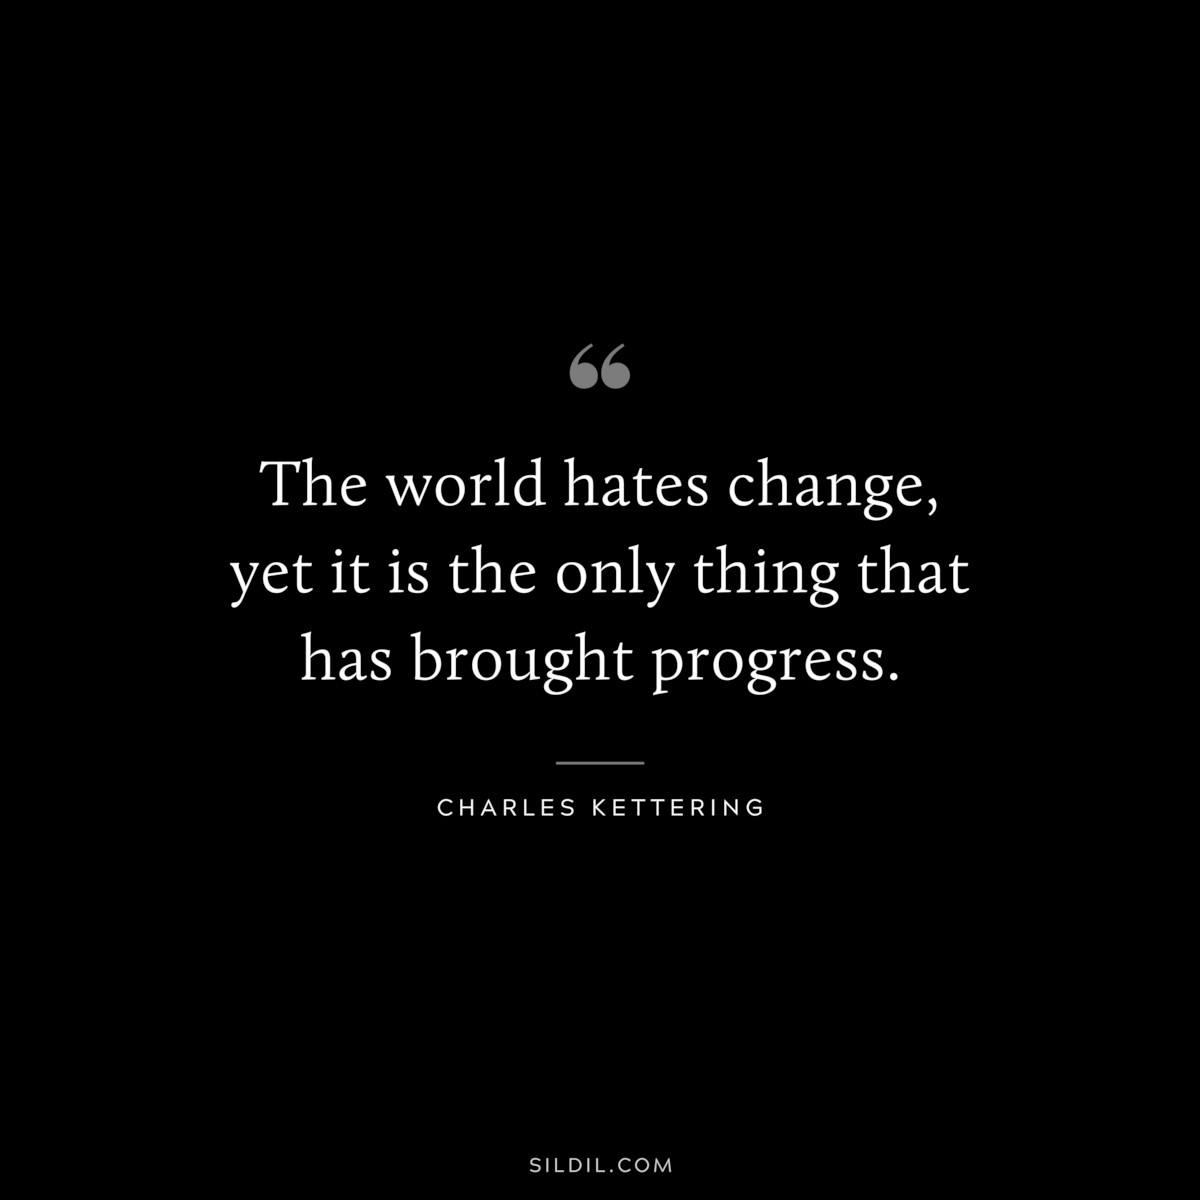 The world hates change, yet it is the only thing that has brought progress. ― Charles Kettering